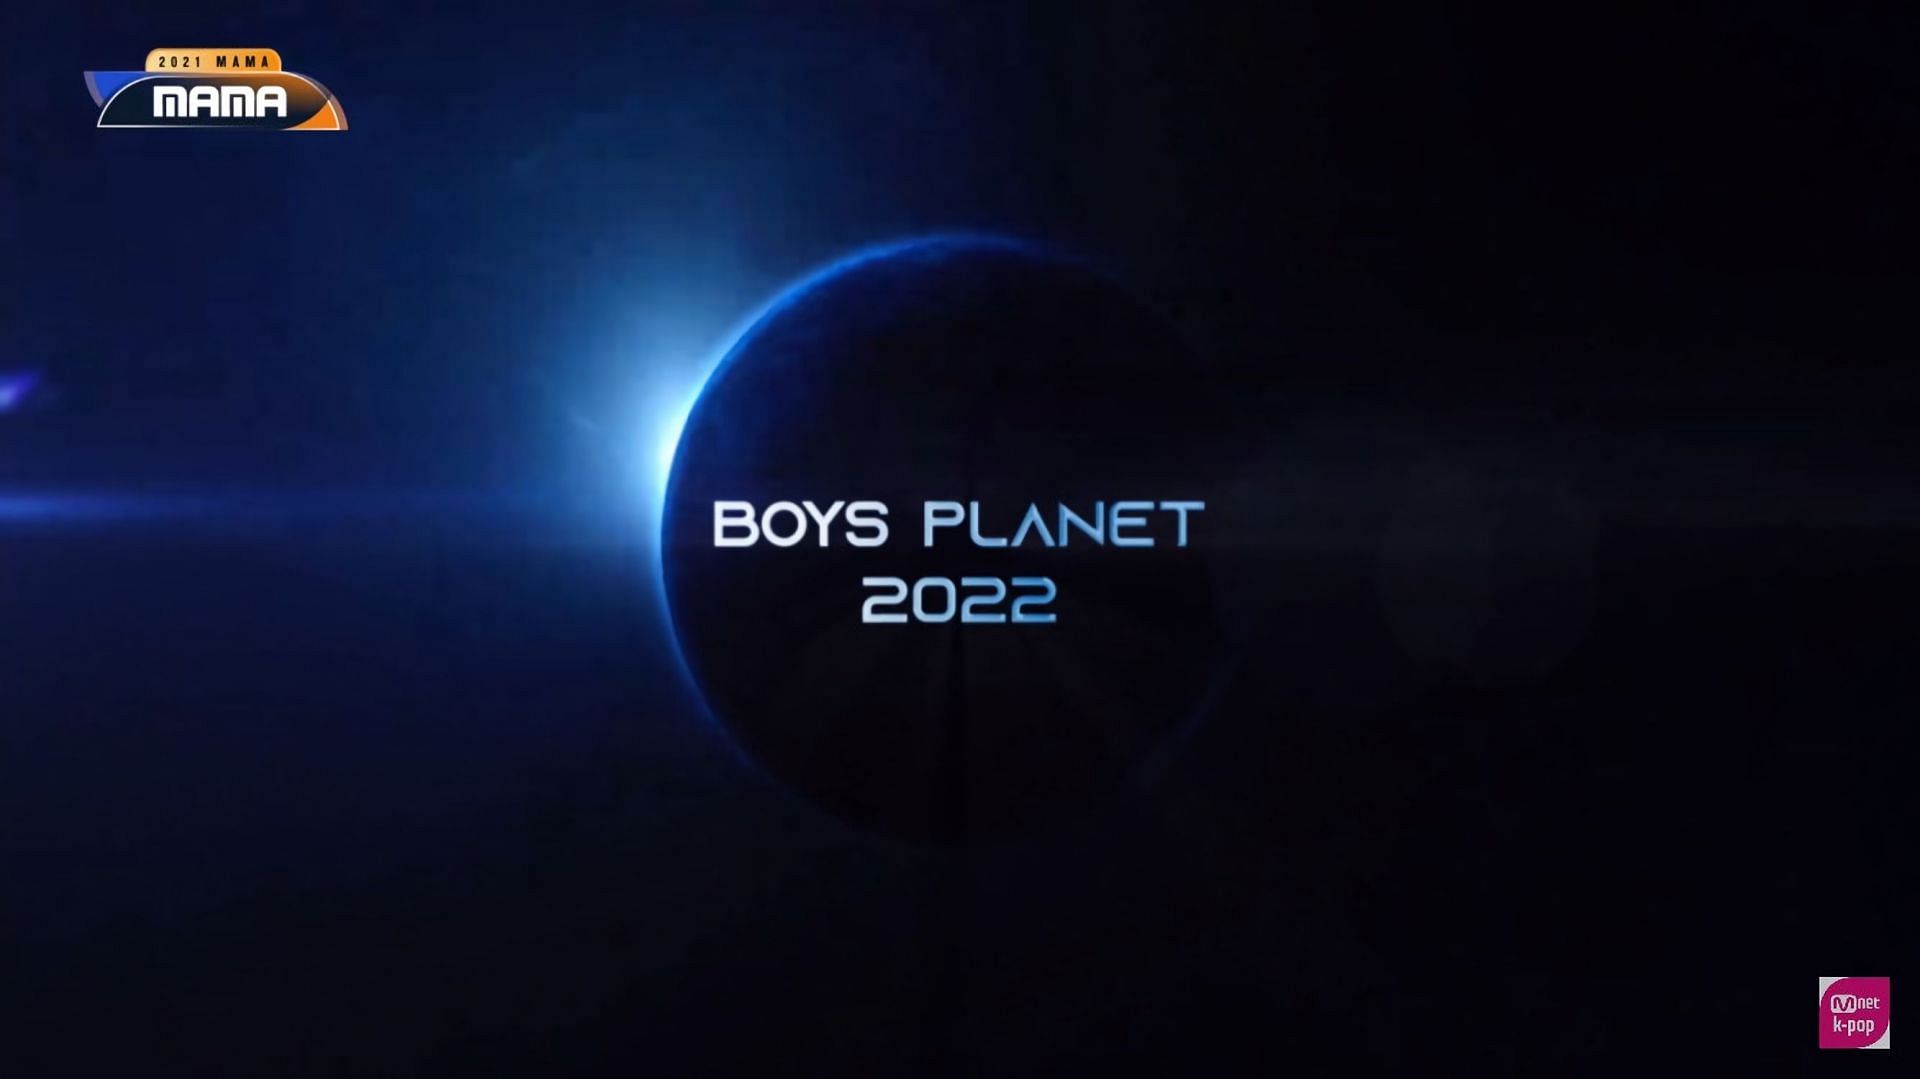 Boys Planet will premiere in 2022. (Image via MNet)